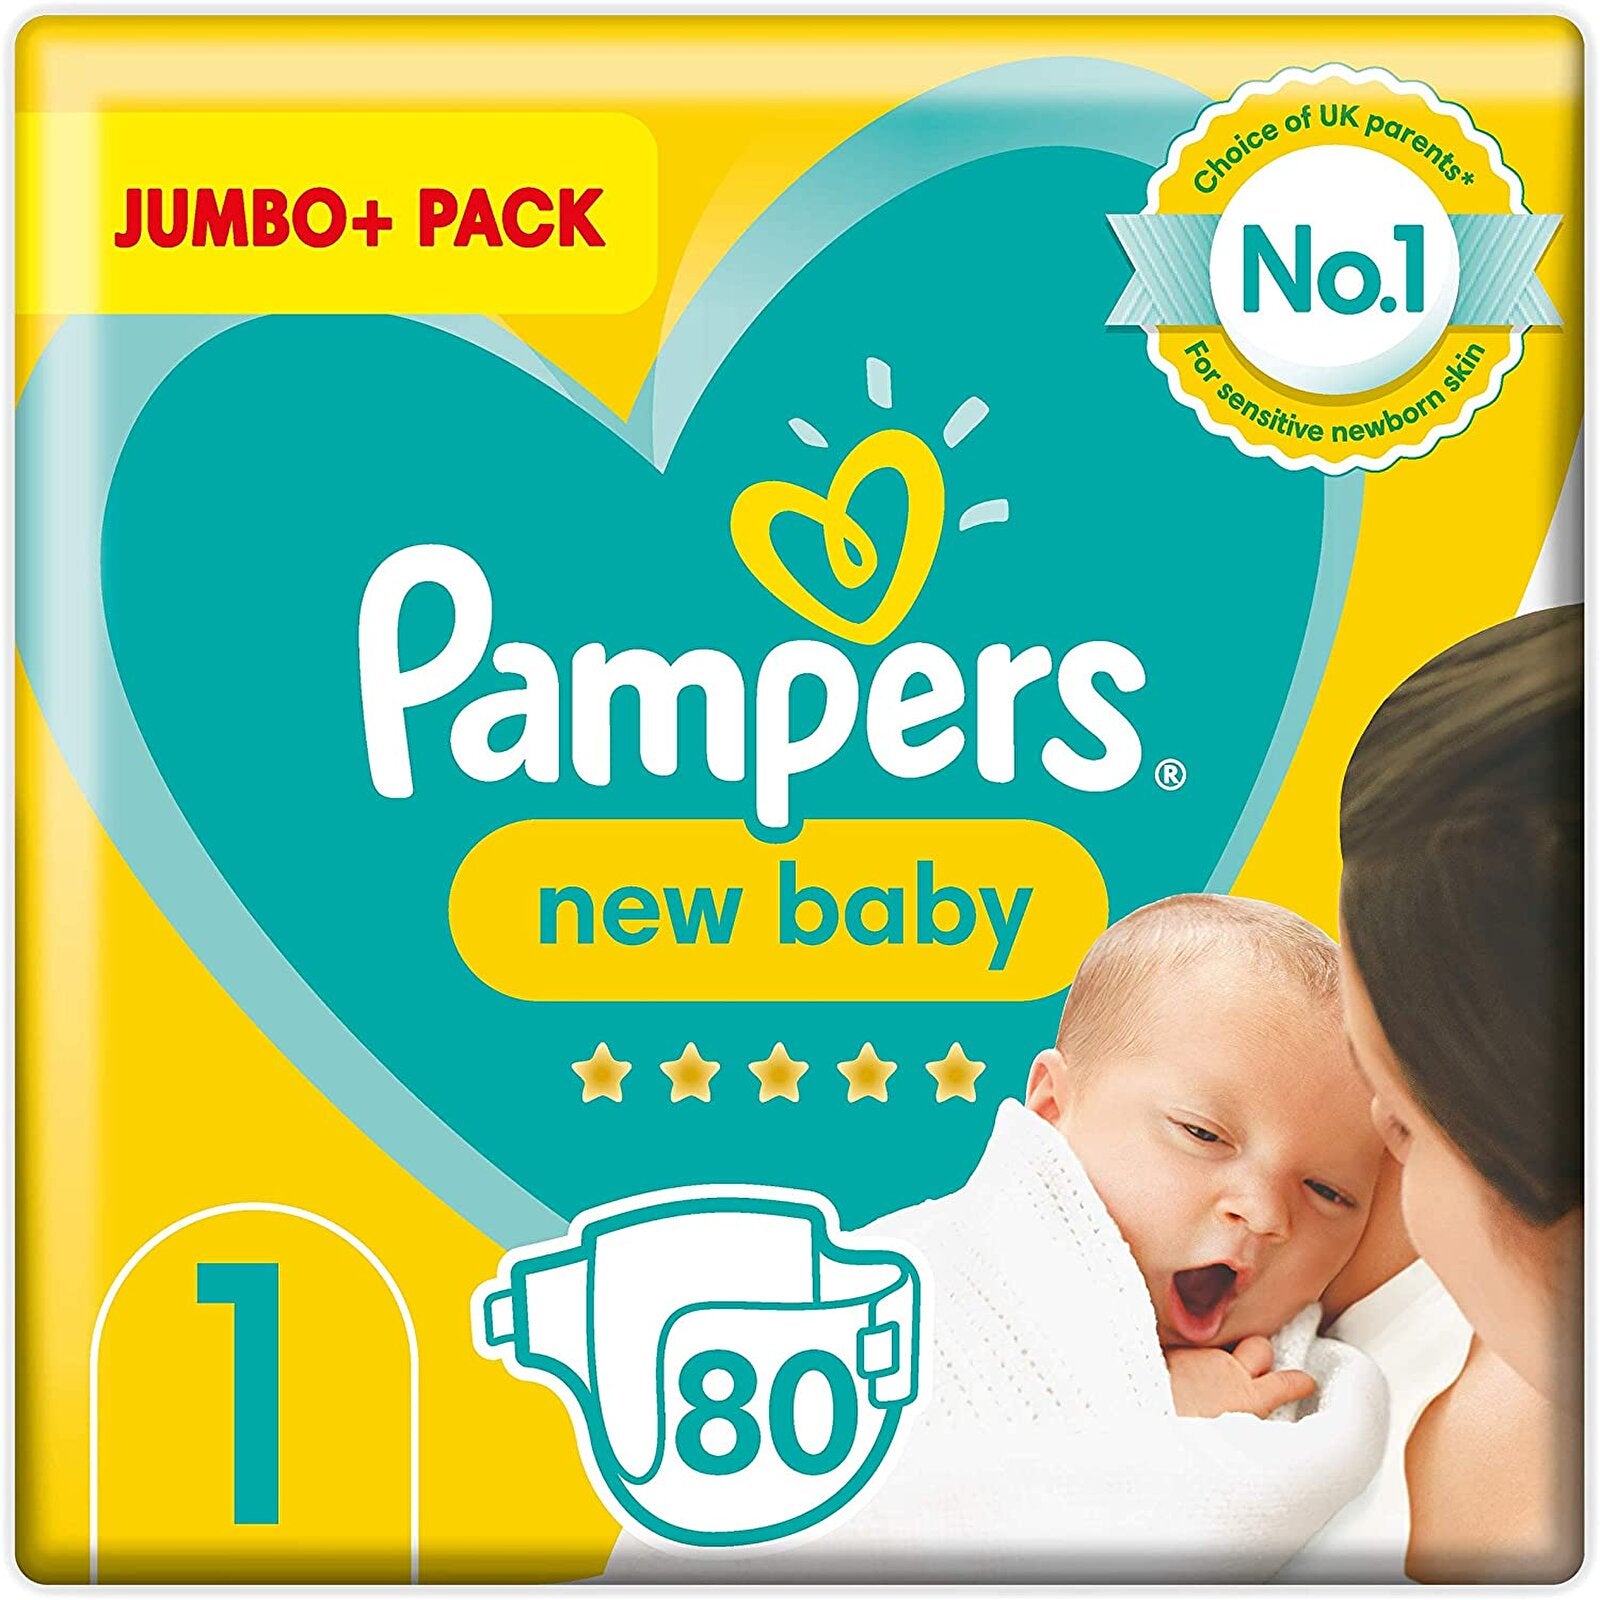 Pampers Baby Nappies, Diapers, Nappy Pants & Wipes